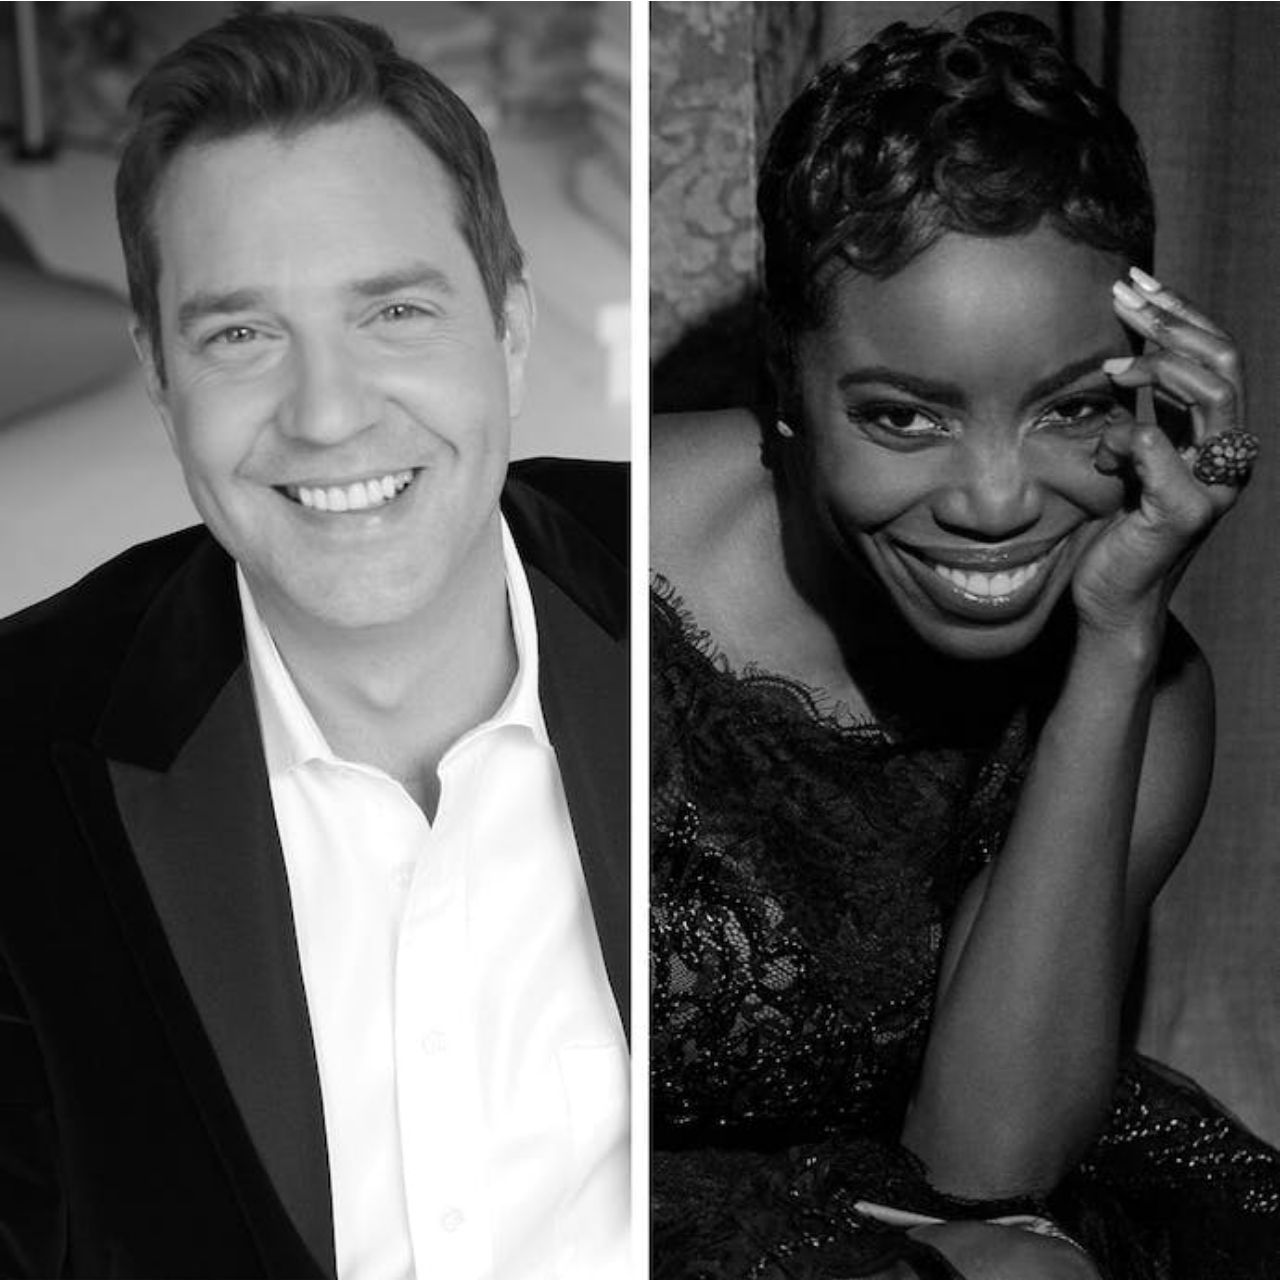 The New York Pops: An Evening with Heather Headley at Isaac Stern Auditorium